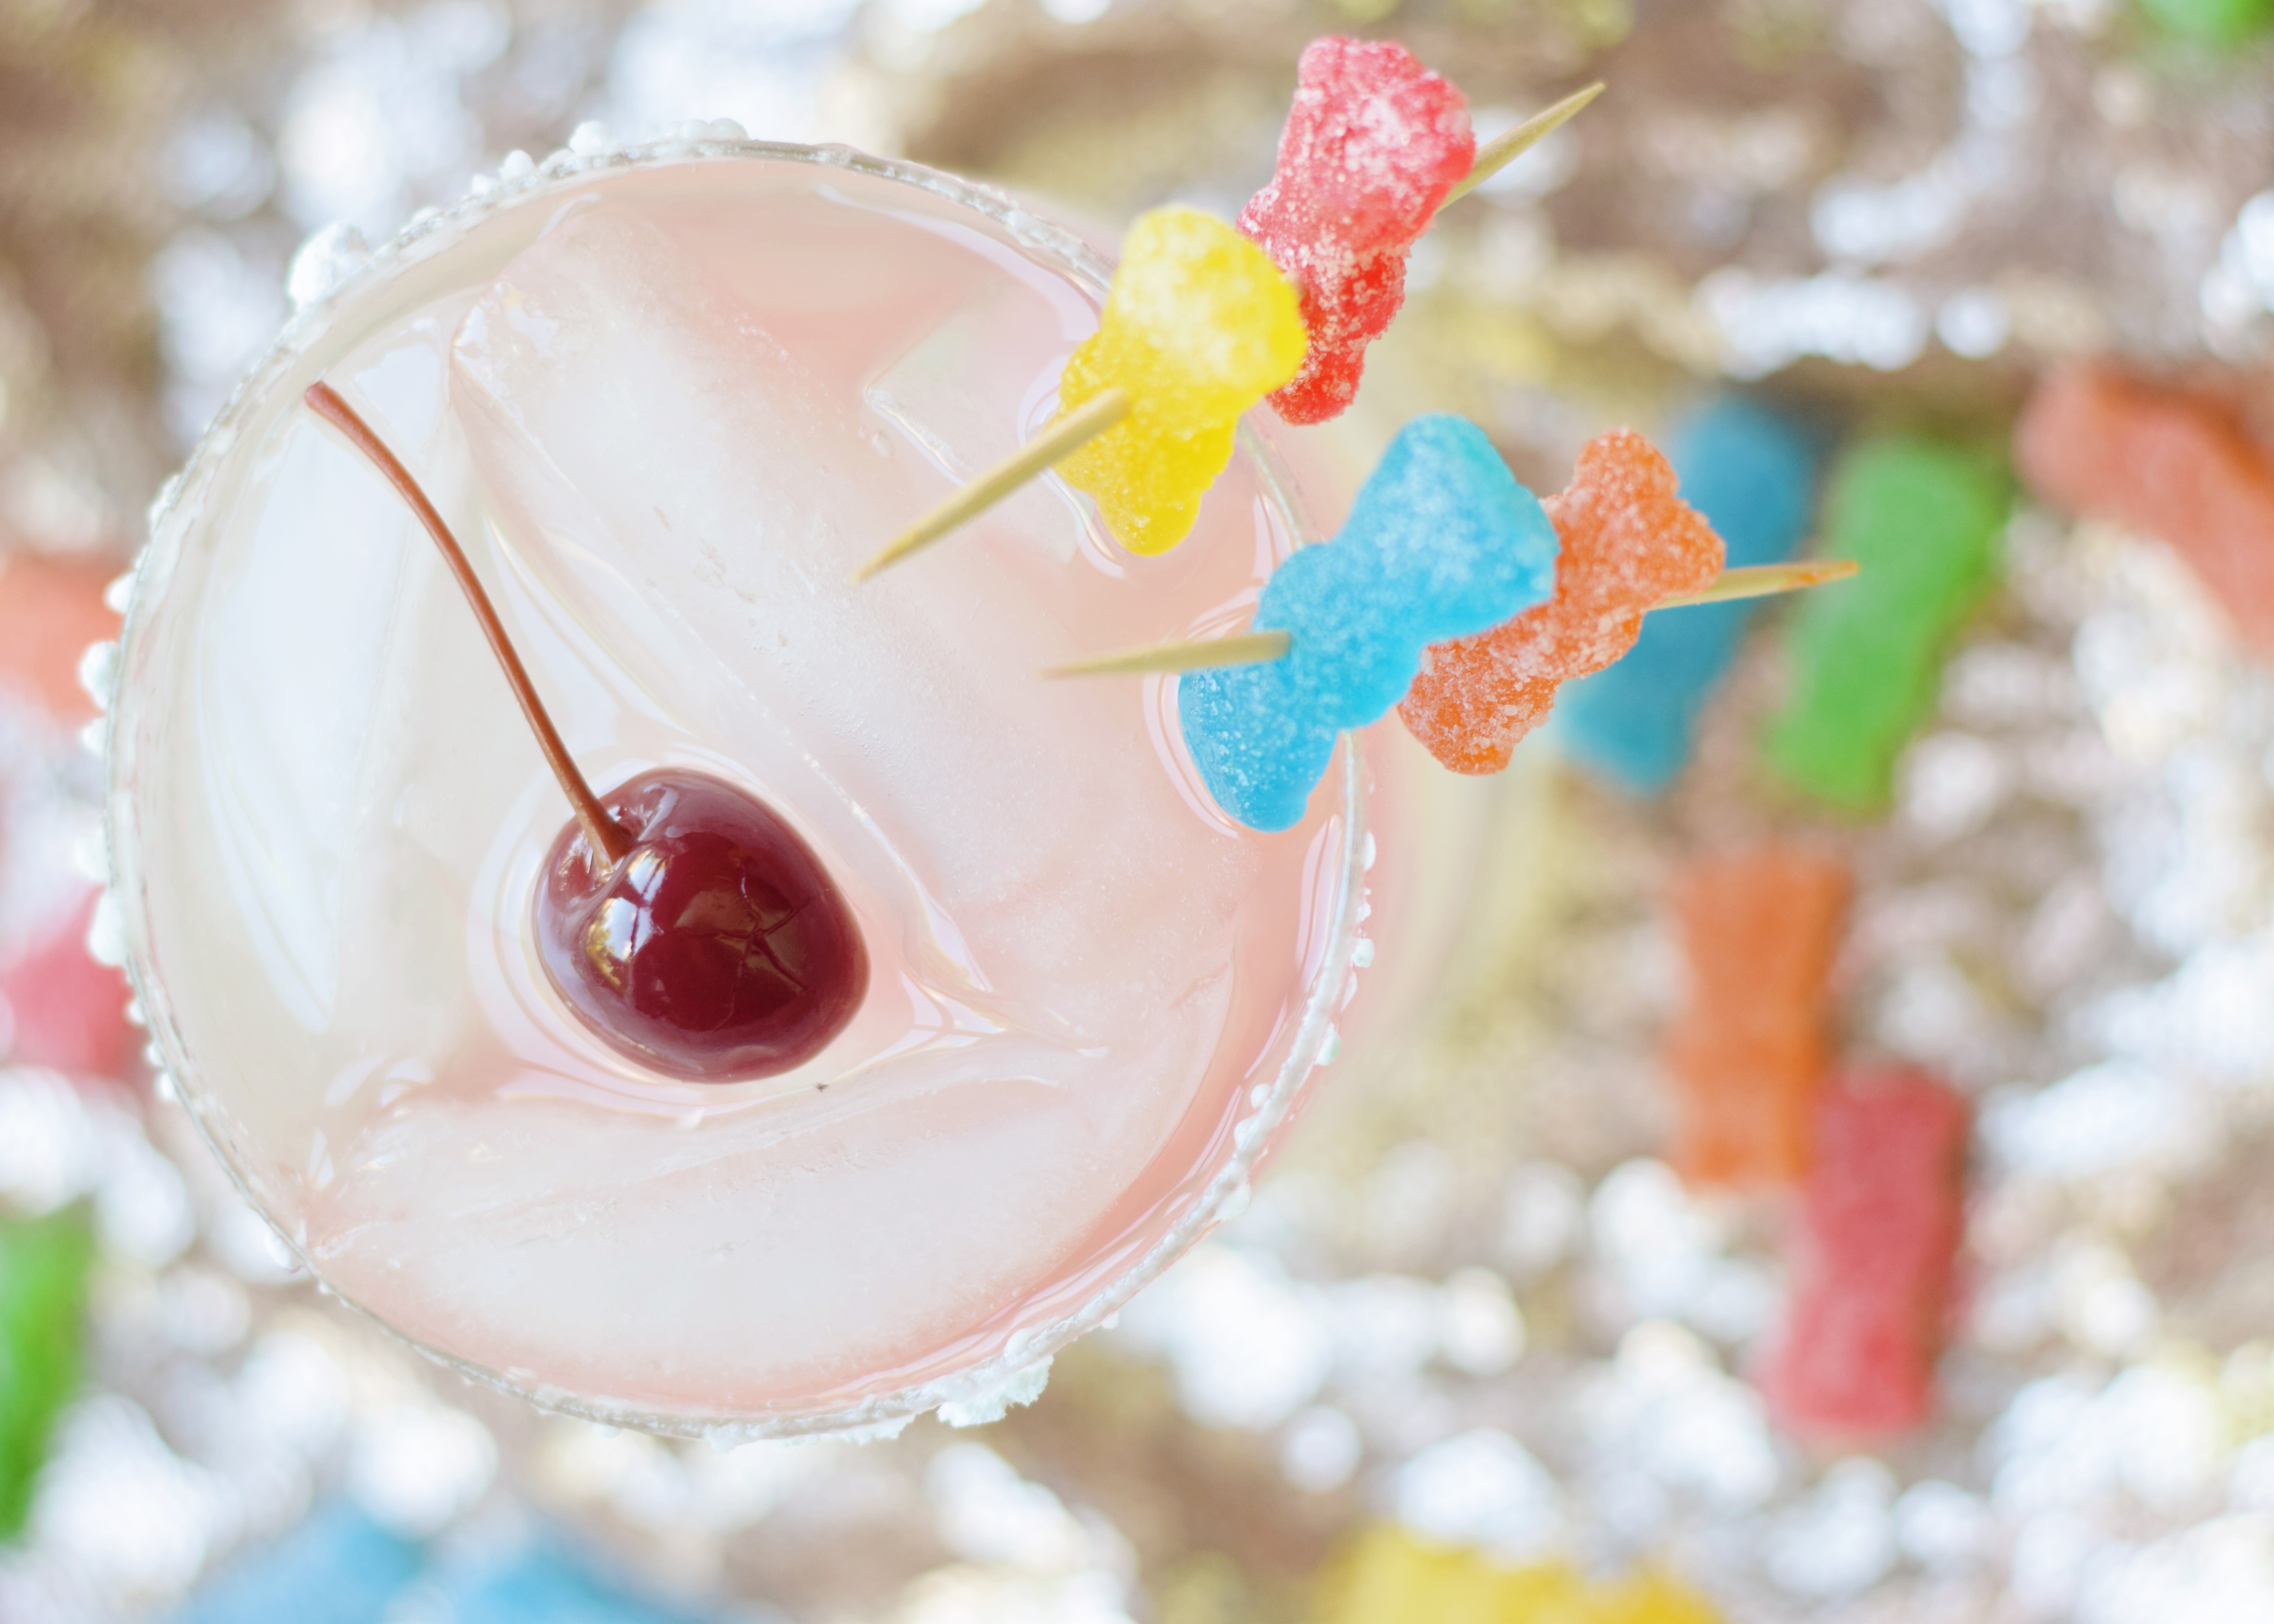 Whiskey Patch - Whiskey Sour - Sour Patch Kids - Candy Cocktail - Halloween Happy Hour - Whiskey Cocktail - Liquor - Whiskey - Happy Hour Idea for Halloween - Halloween Candy - Communikait by Kait Hanson